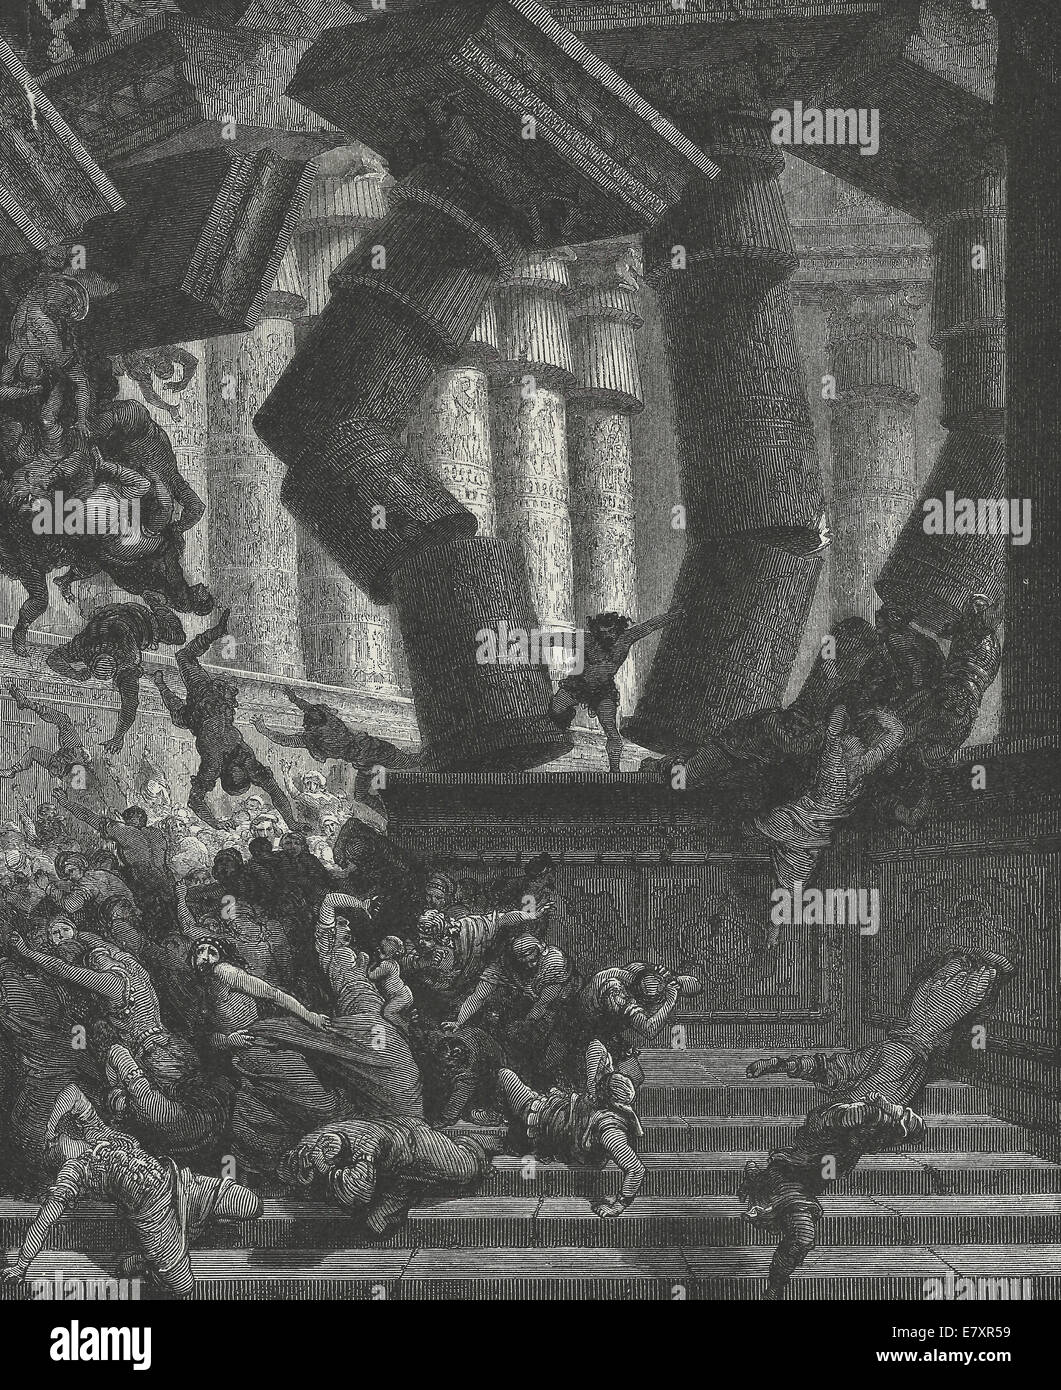 Death of Samson - Samson pulls down the pillars in the Temple of Dagon, killing himself and the Philistines, Old Testament Stock Photo